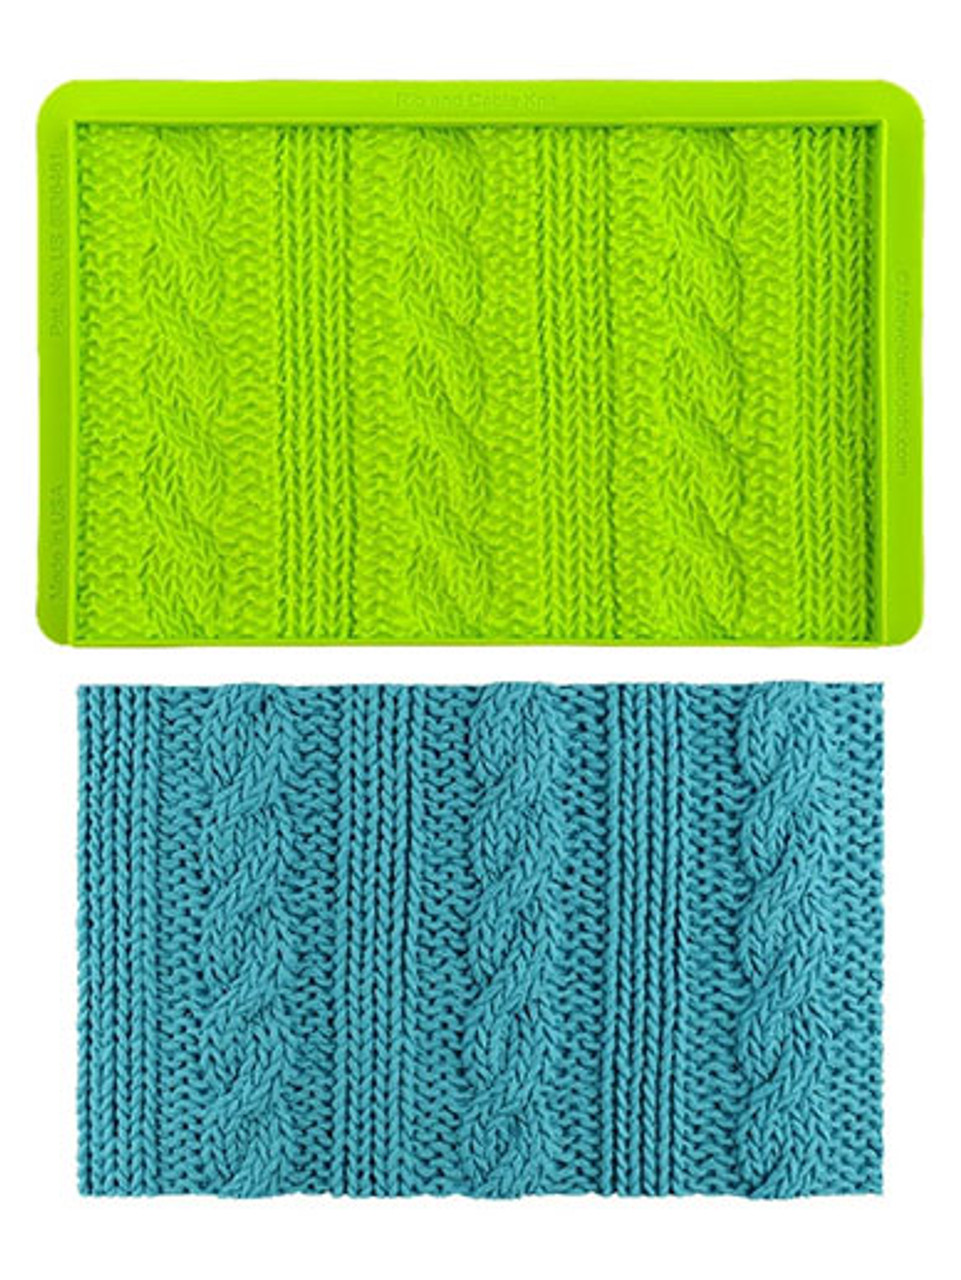 Rib and Cable Knit Simpress Marvelous Molds